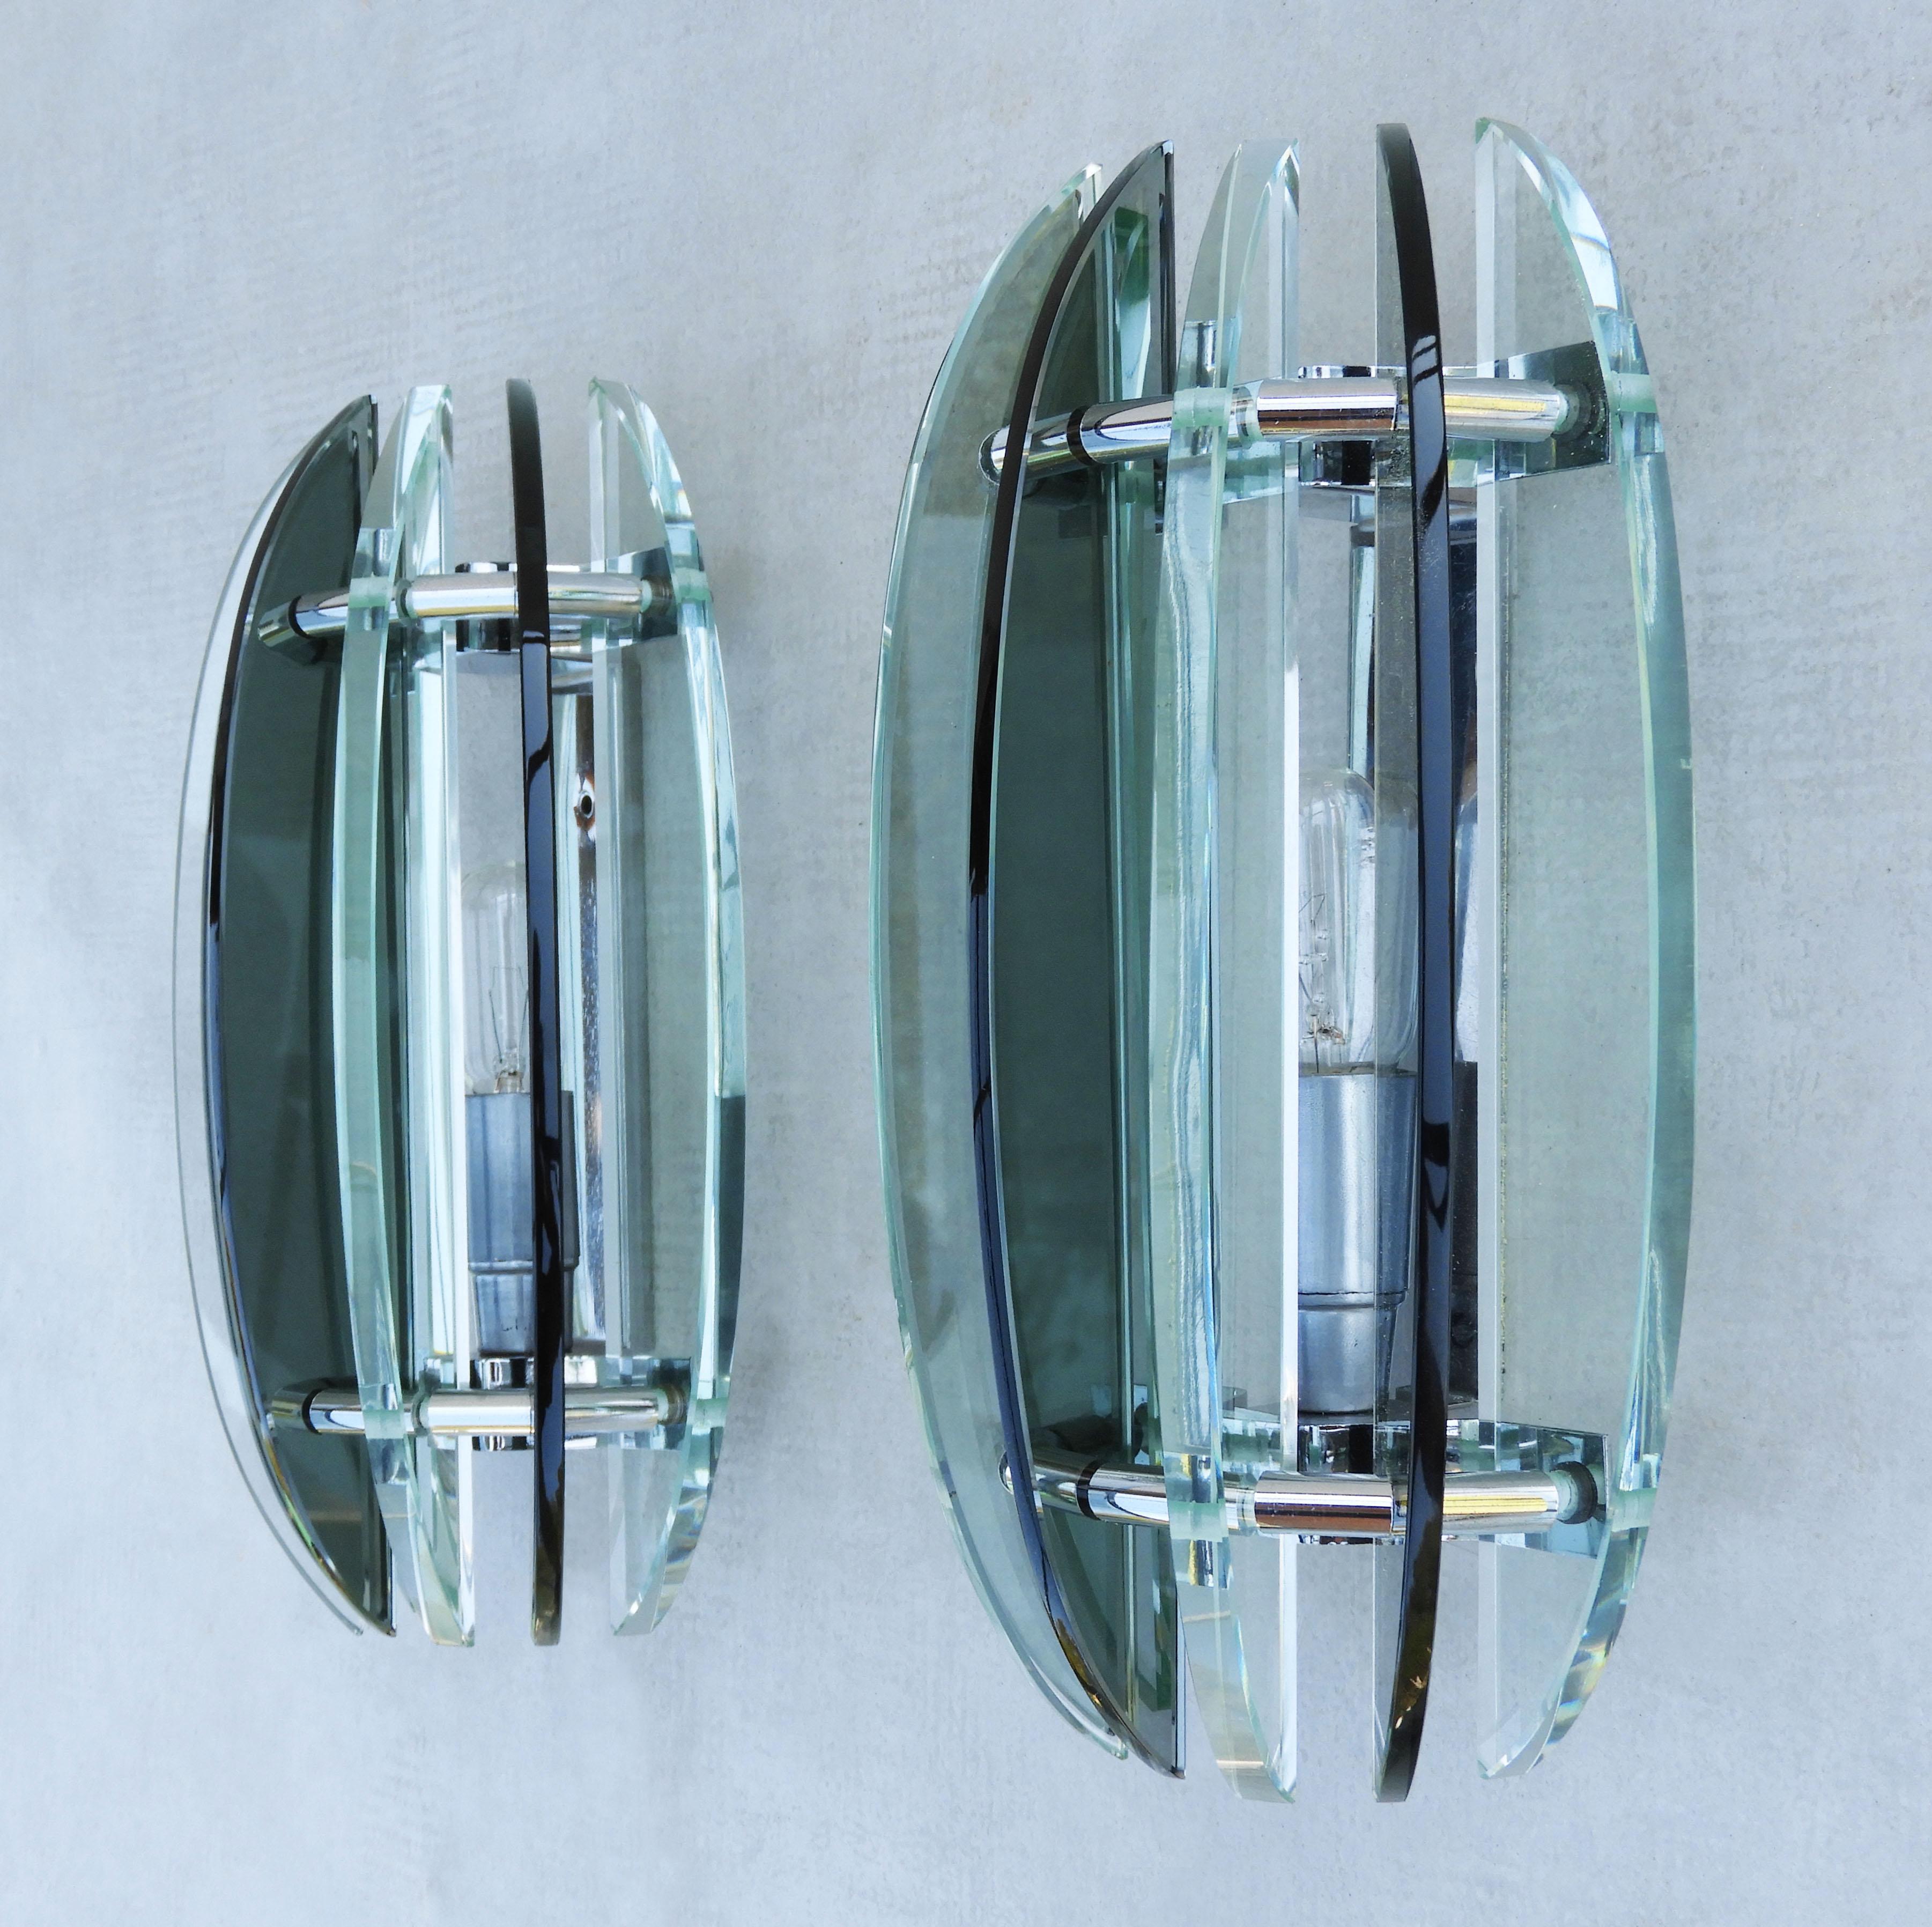 Pair of Veca glass wall lights mid century Italy, circa 1970

Two mid-century wall light sconces from Italian lighting company Veca.
Seven alternating crescents of smoked black and pale green glass in semicircular form on a chromed frame